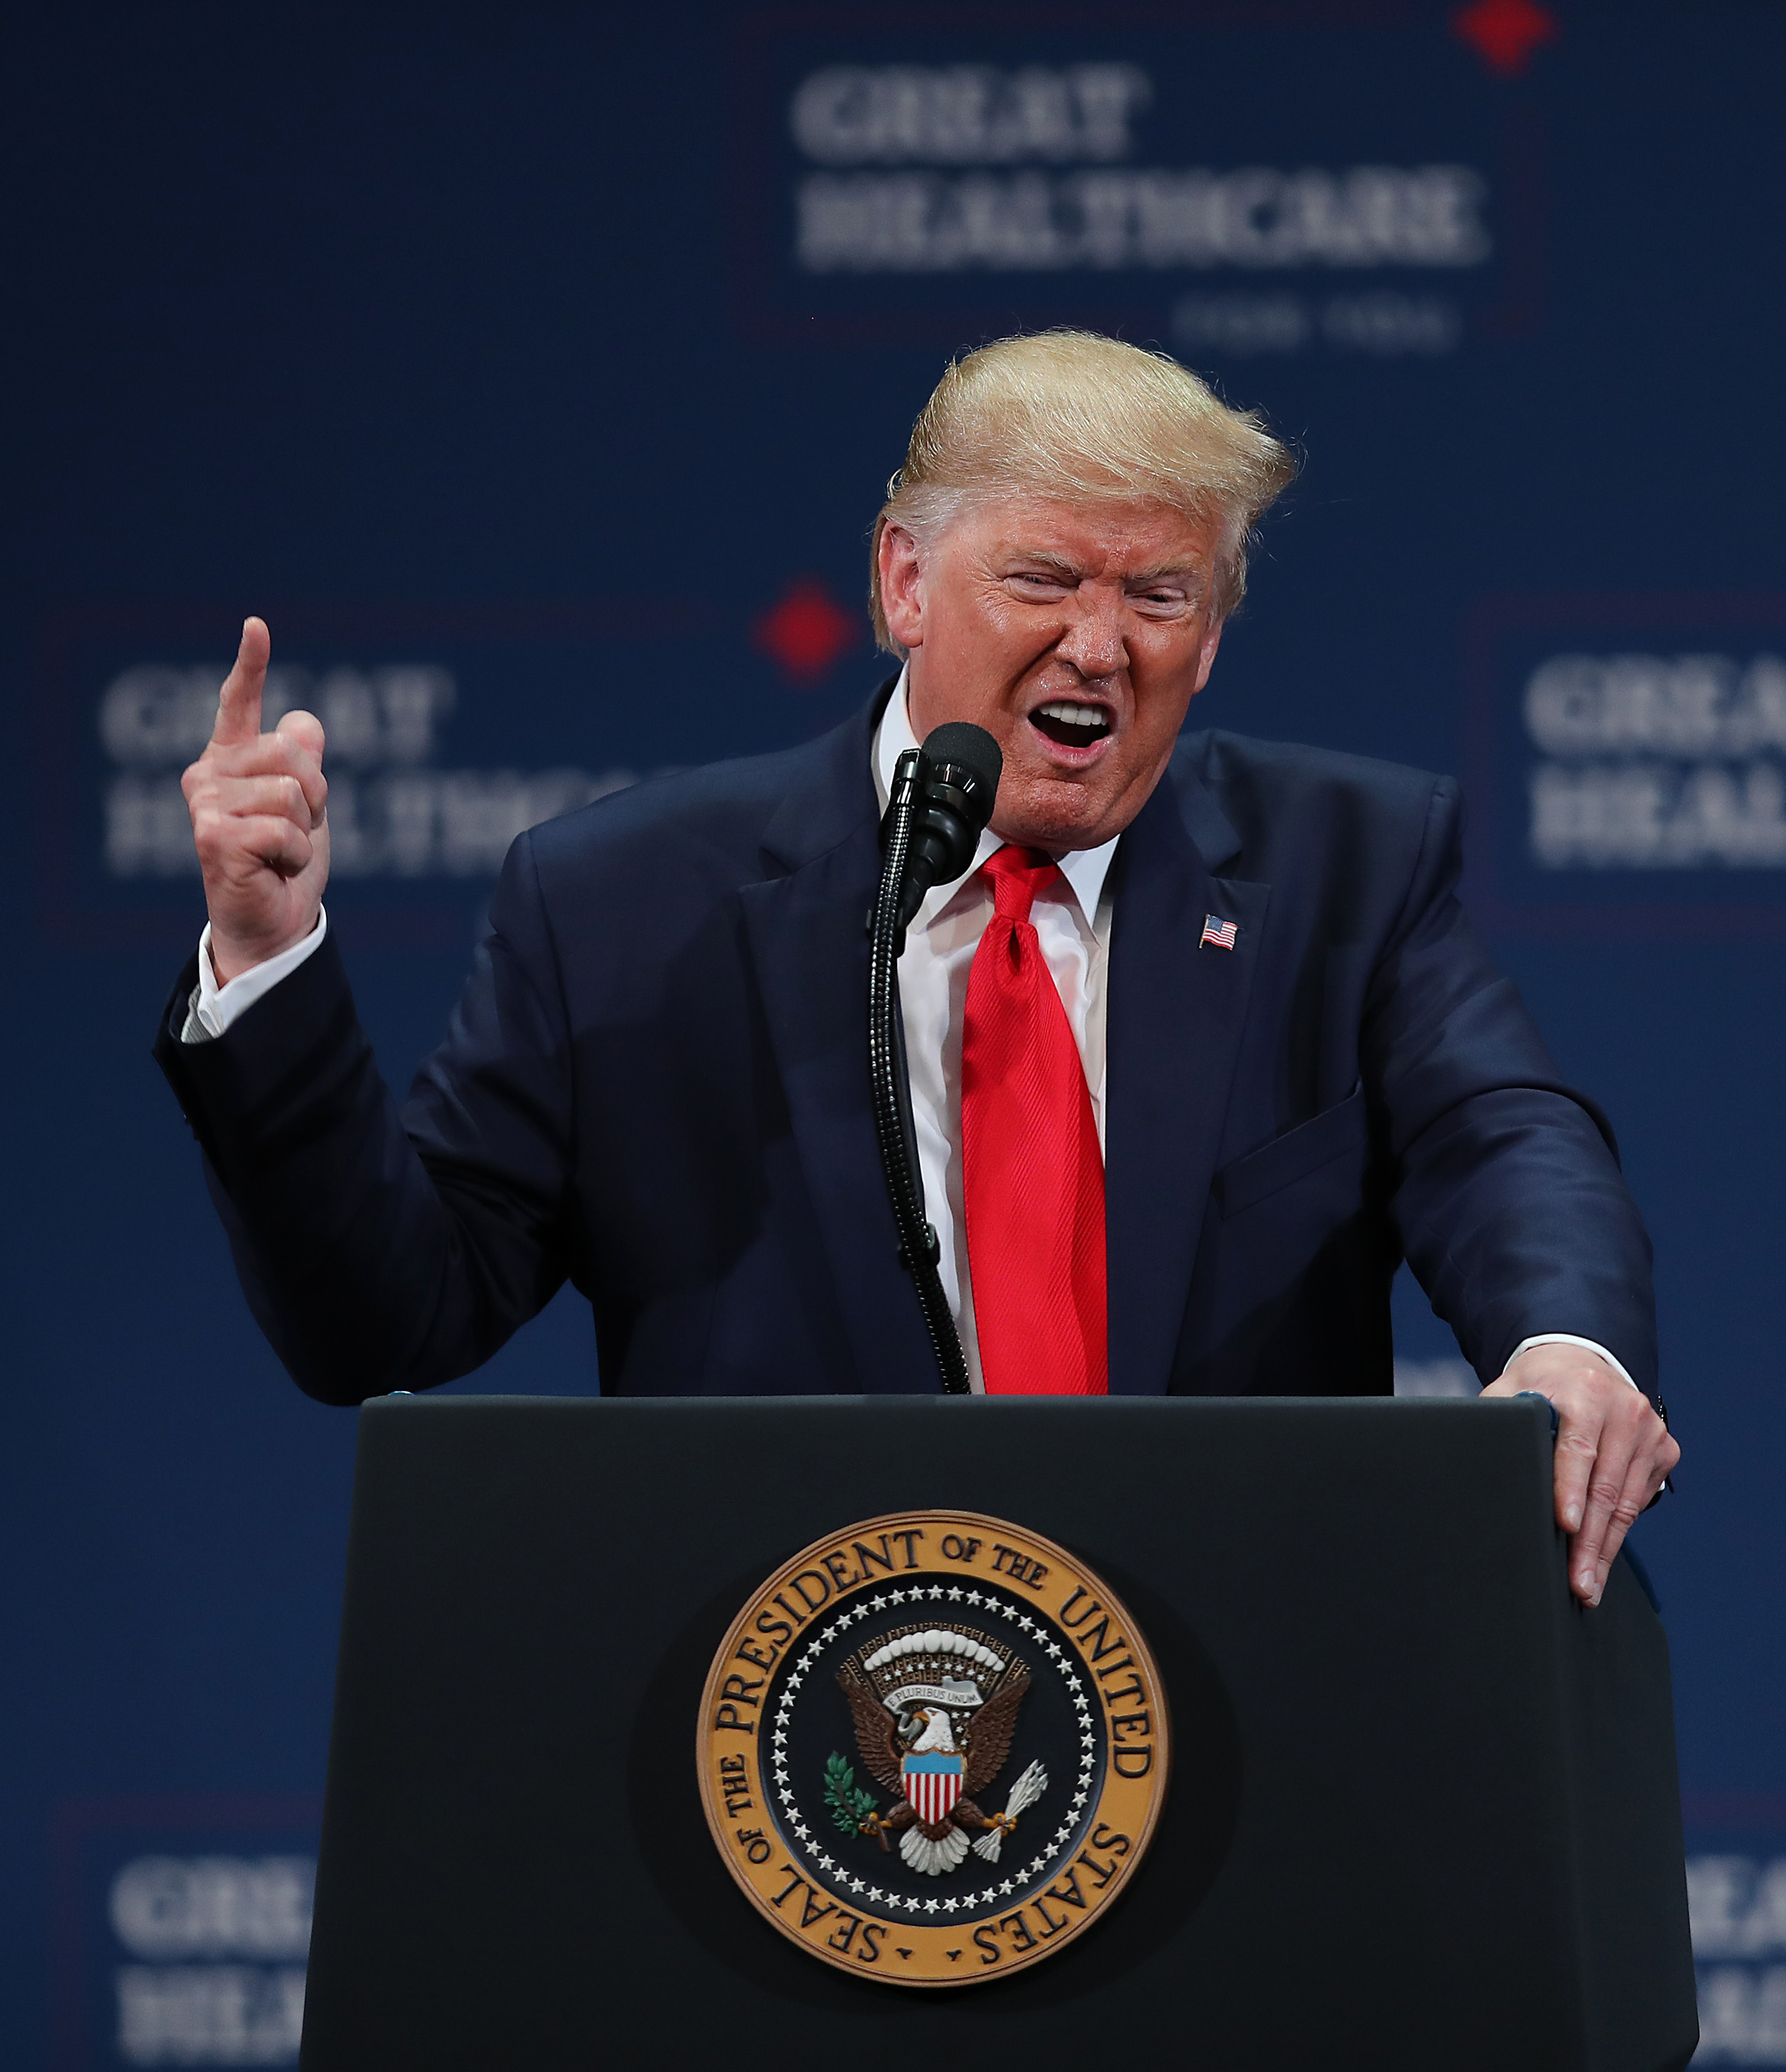 President Donald Trump speaks during an event in The Villages, Florida on Oct. 3, 2019. (Joe Raedle—Getty Images)